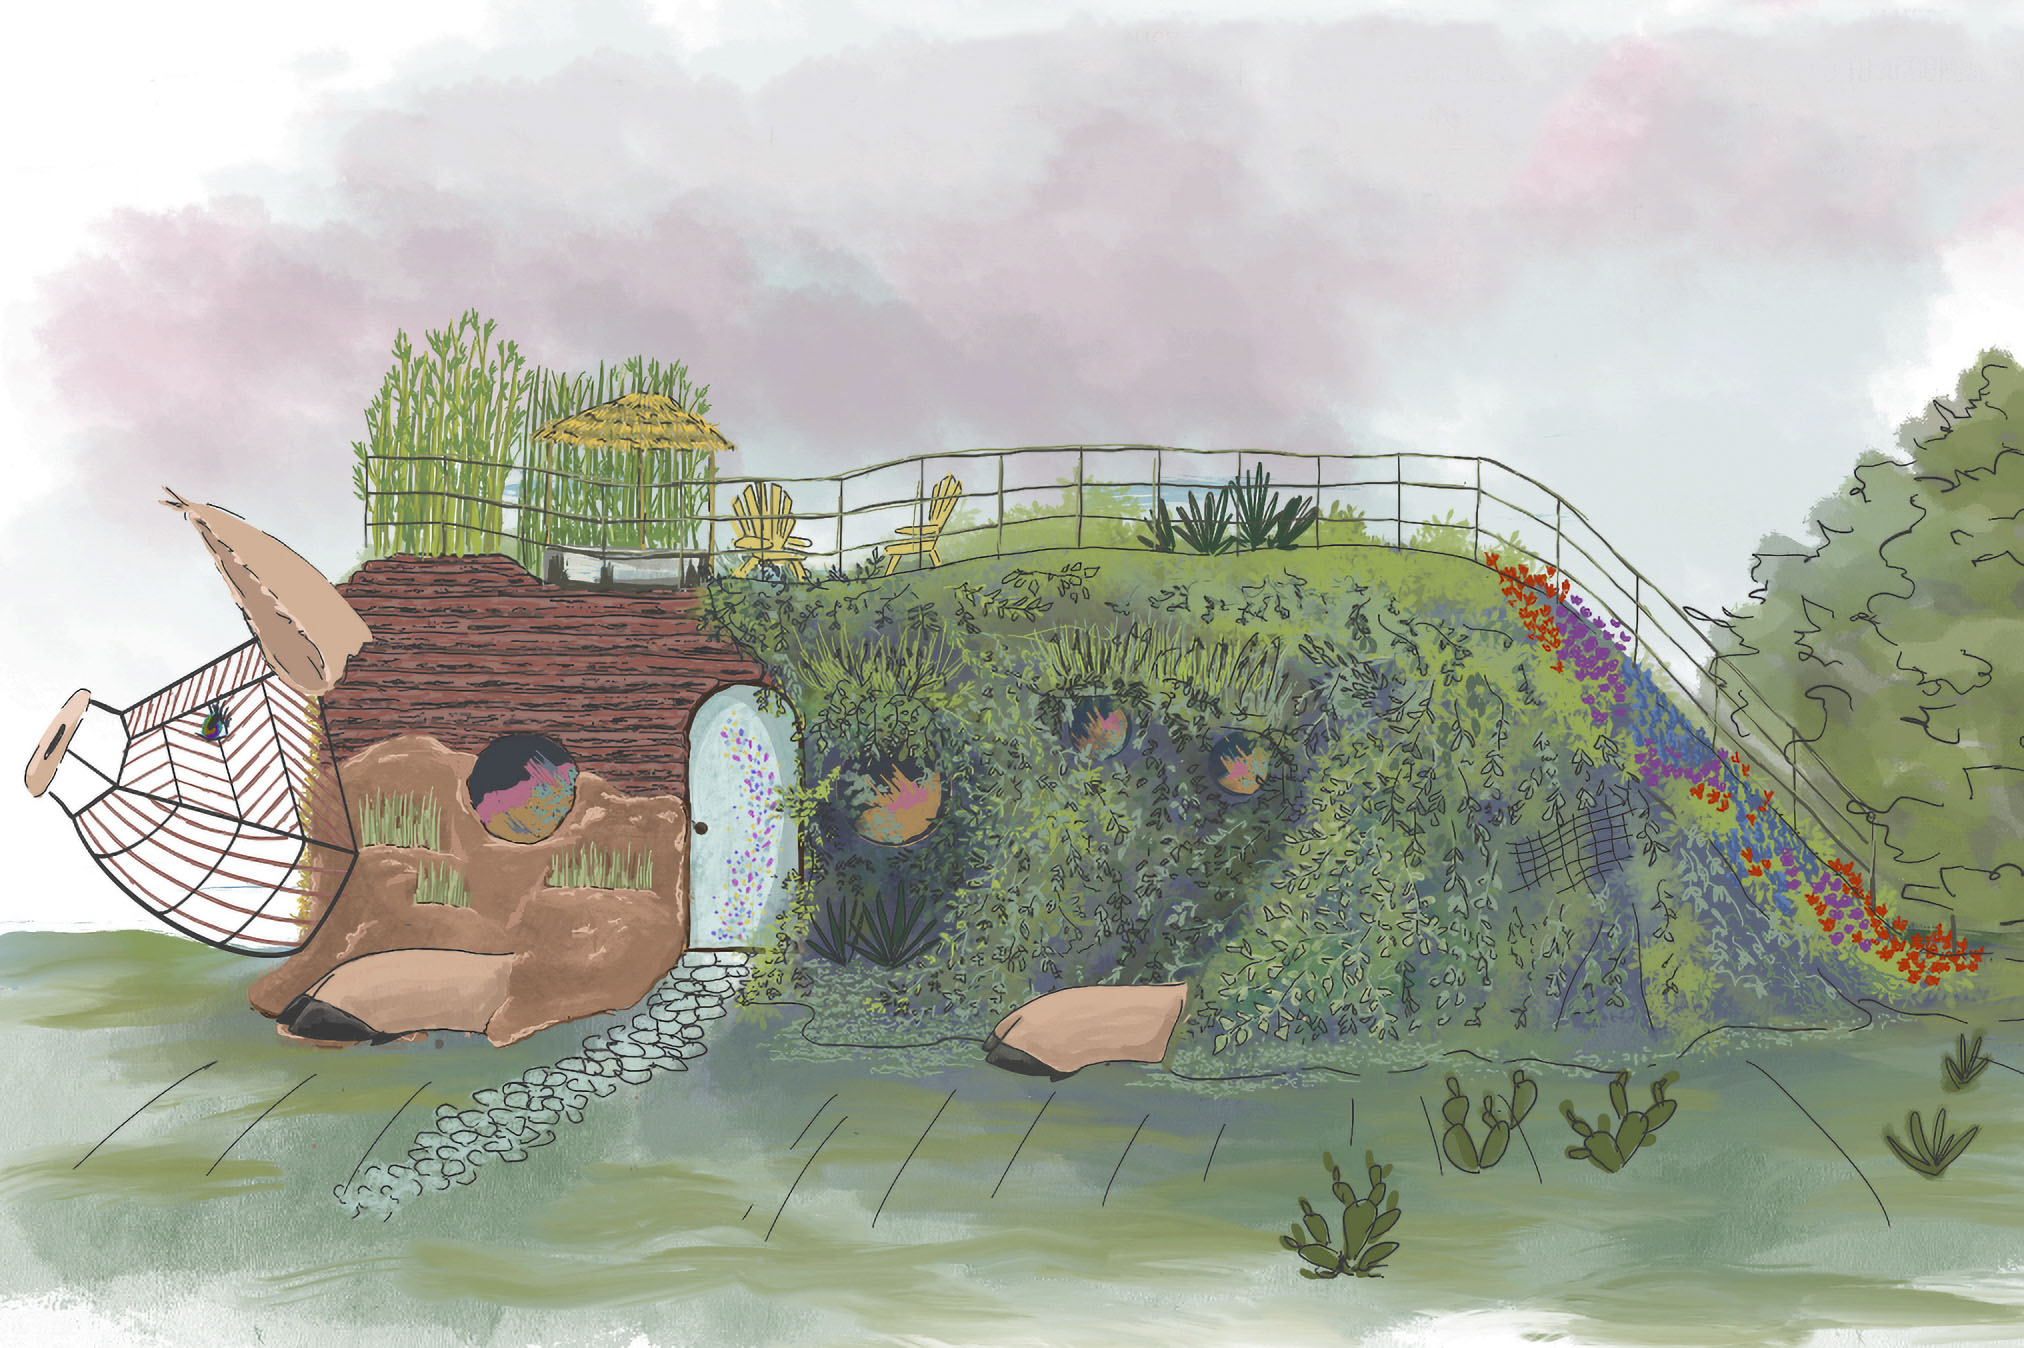 An earth home in the shape of a pig with terraced gardens of flowers and greenery